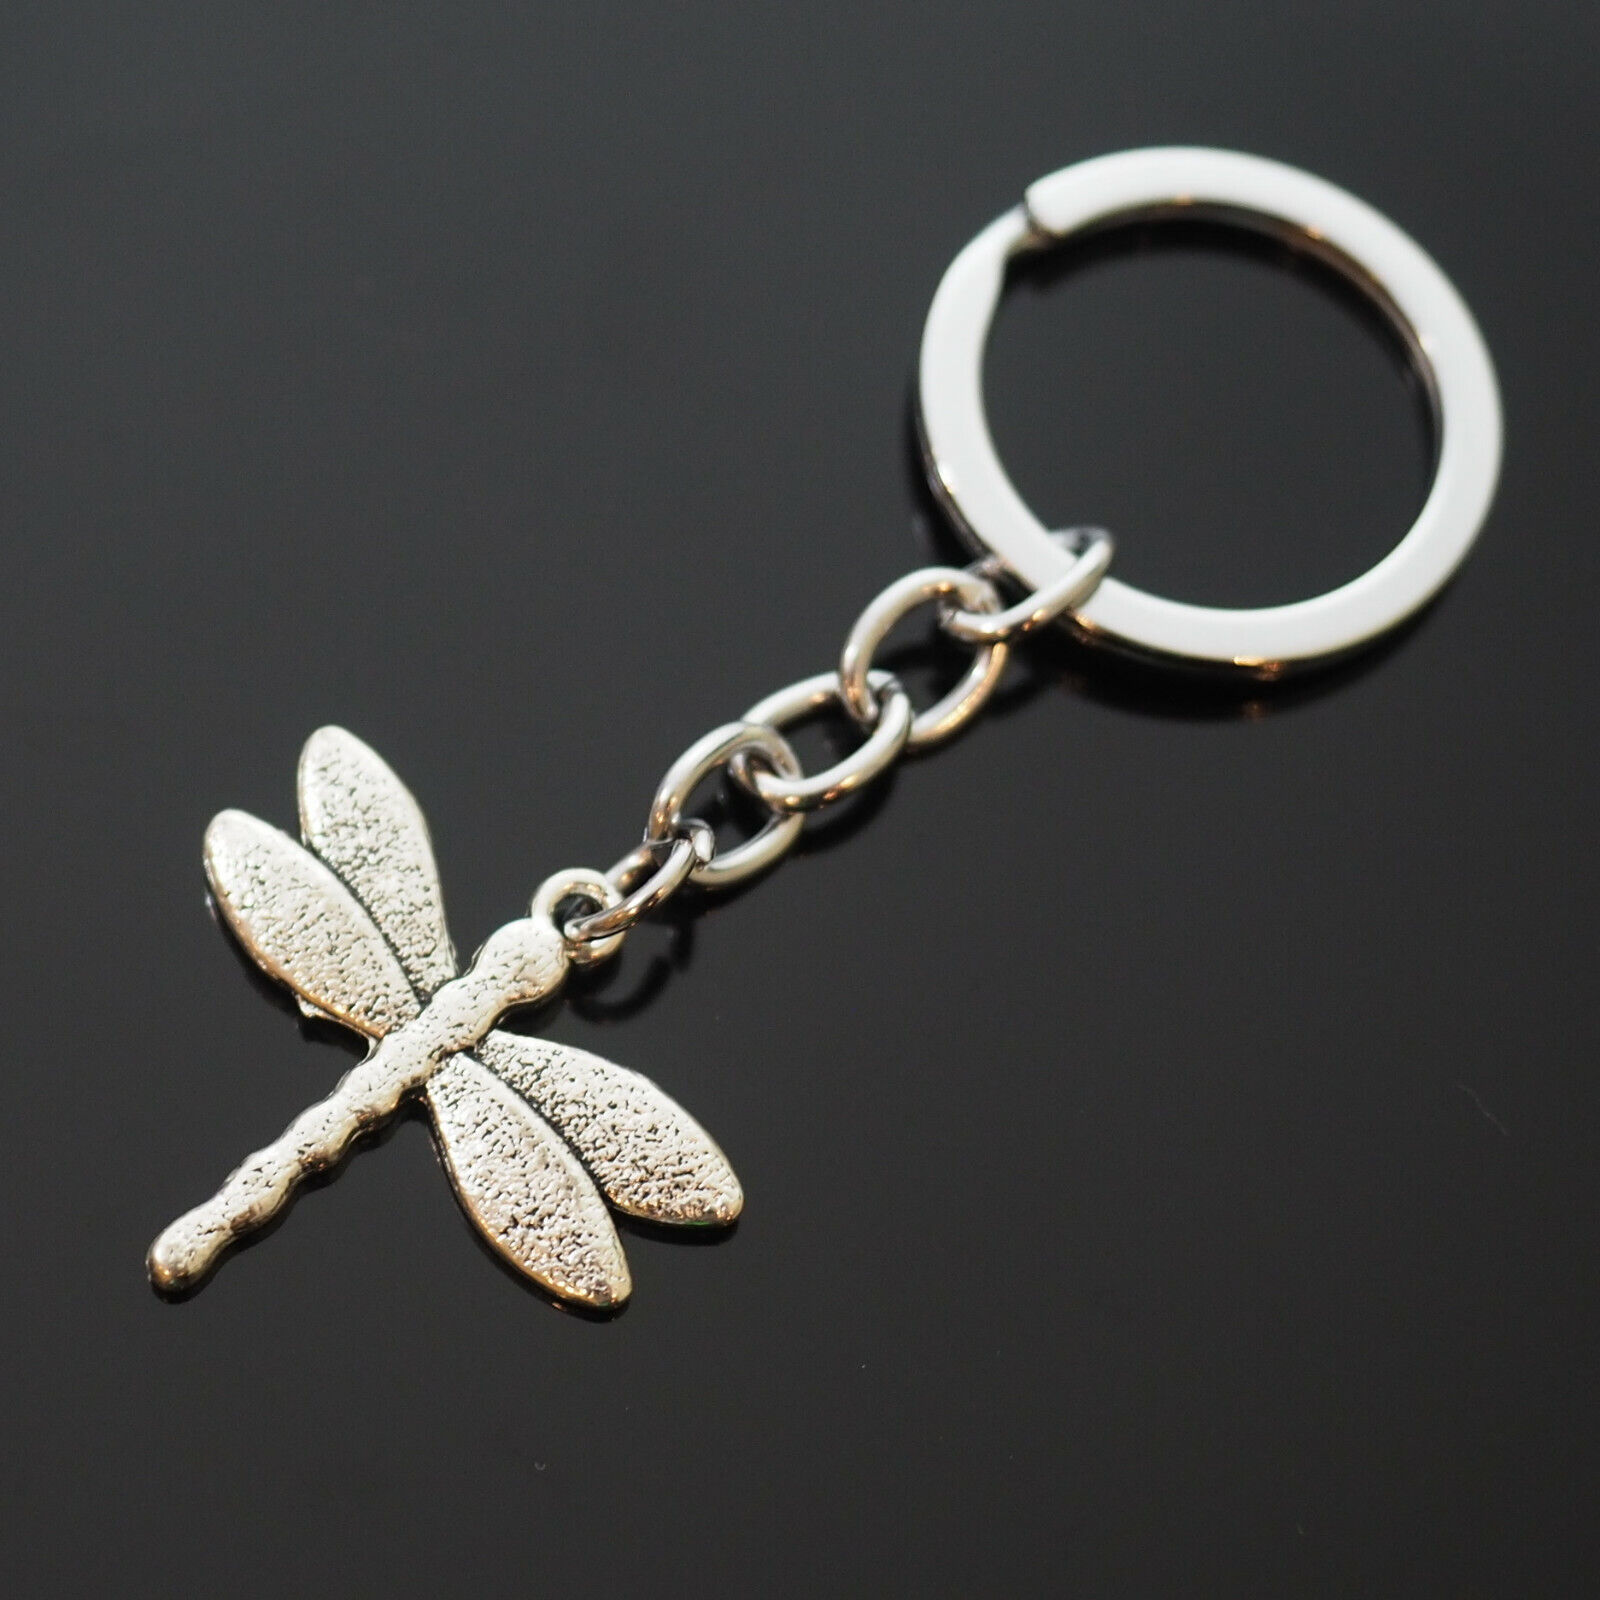 Dragonfly Key Chain Silver Pendant Charm Keychain Insect Lovers Gift 28x30mm